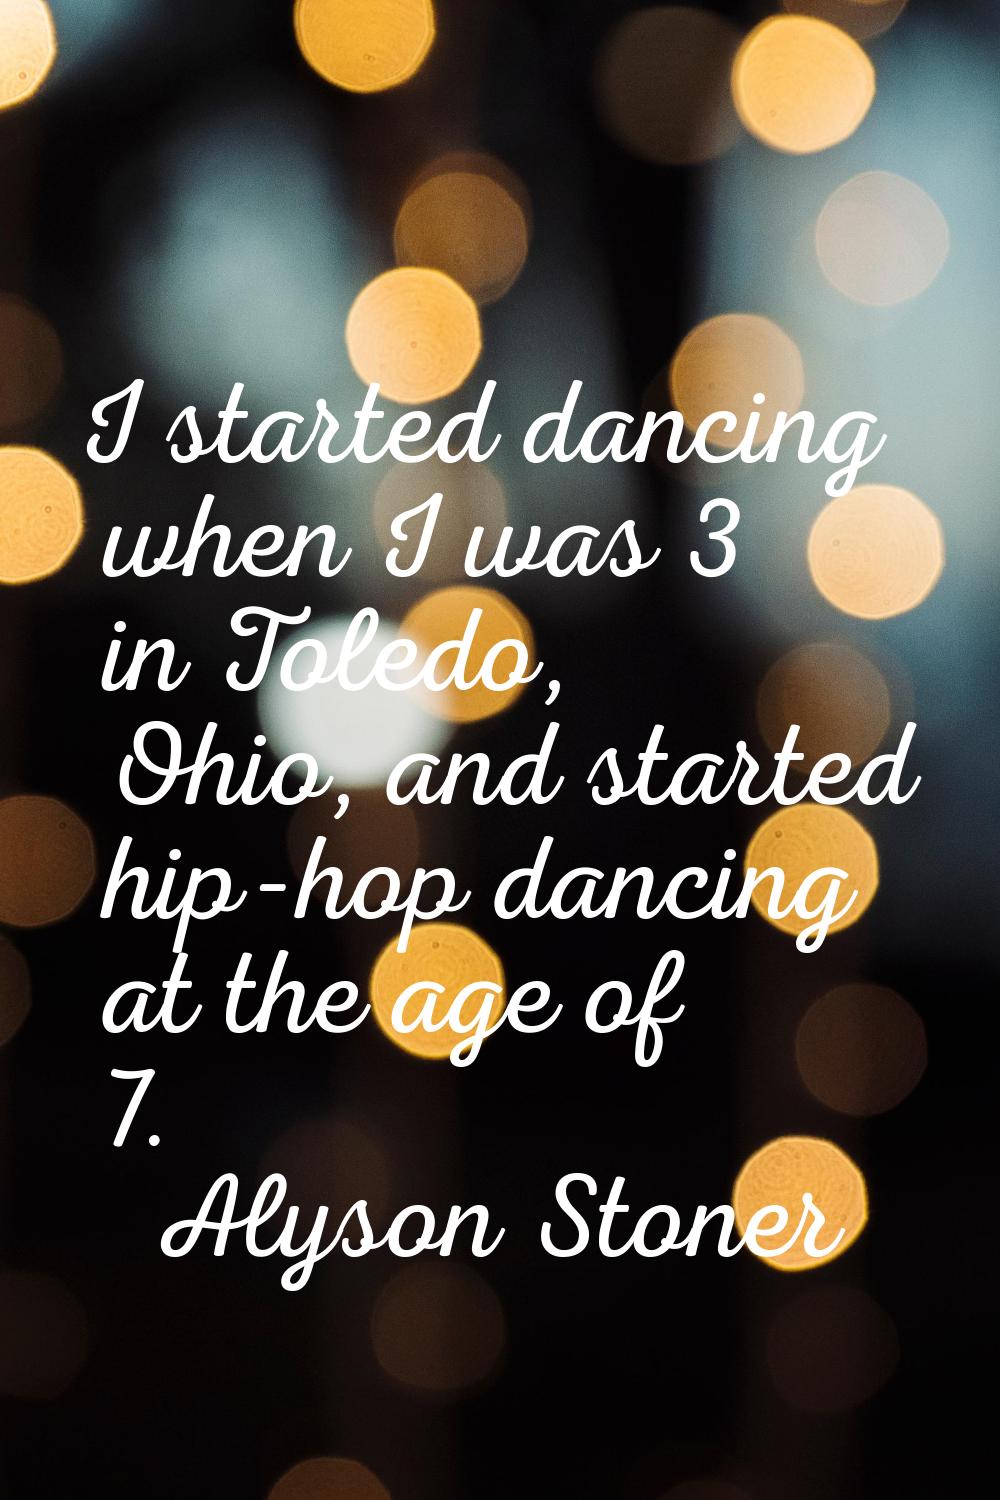 I started dancing when I was 3 in Toledo, Ohio, and started hip-hop dancing at the age of 7.